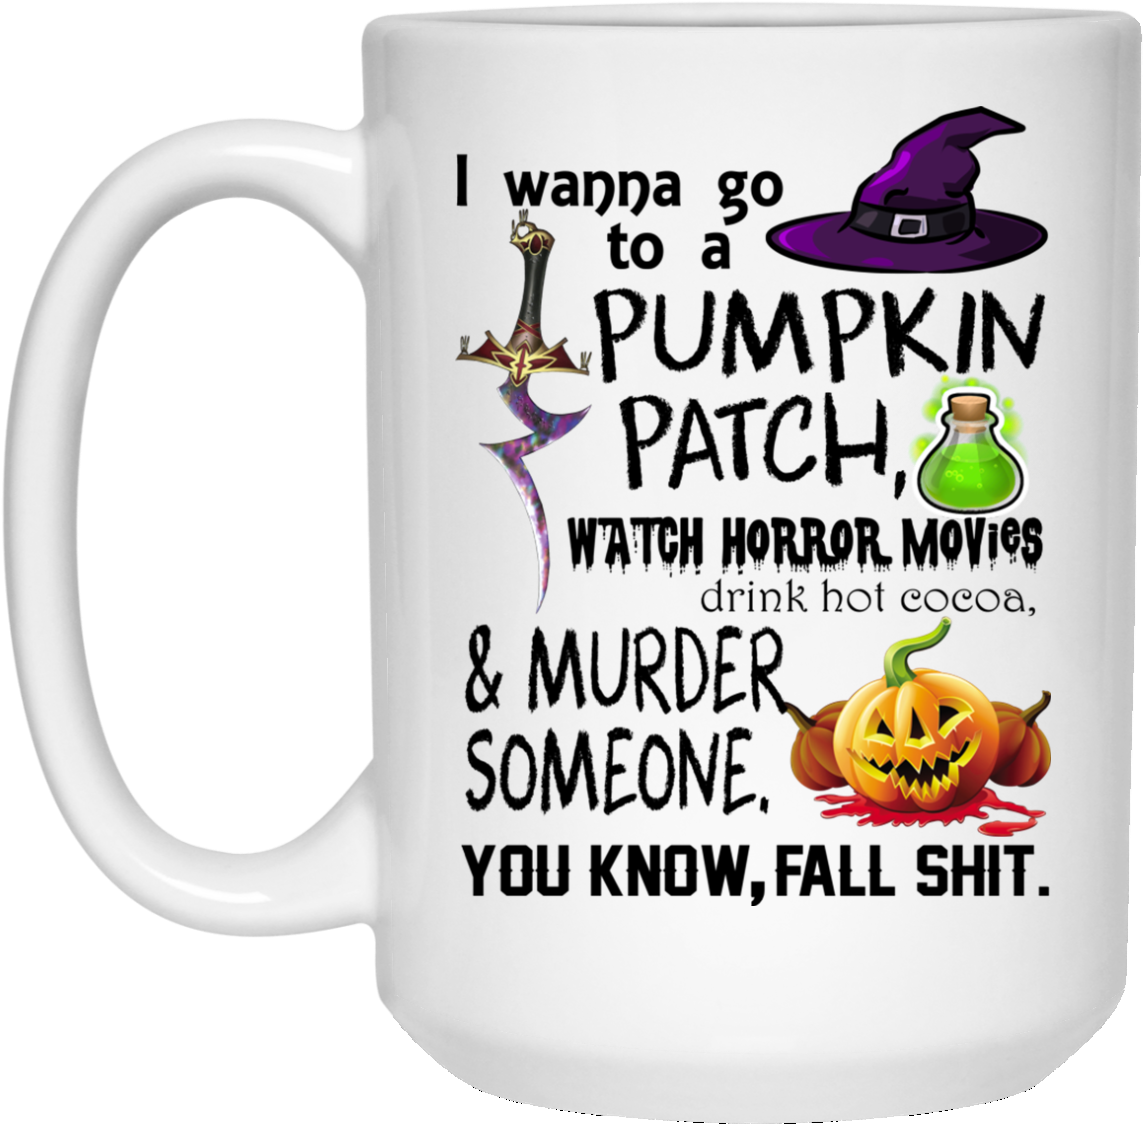 I Wanna Go To A Pumpkin Patch, Watch Horror Movies - Wanna Go To A Pumpkin Patch Watch Horror Movies You (1155x1155), Png Download